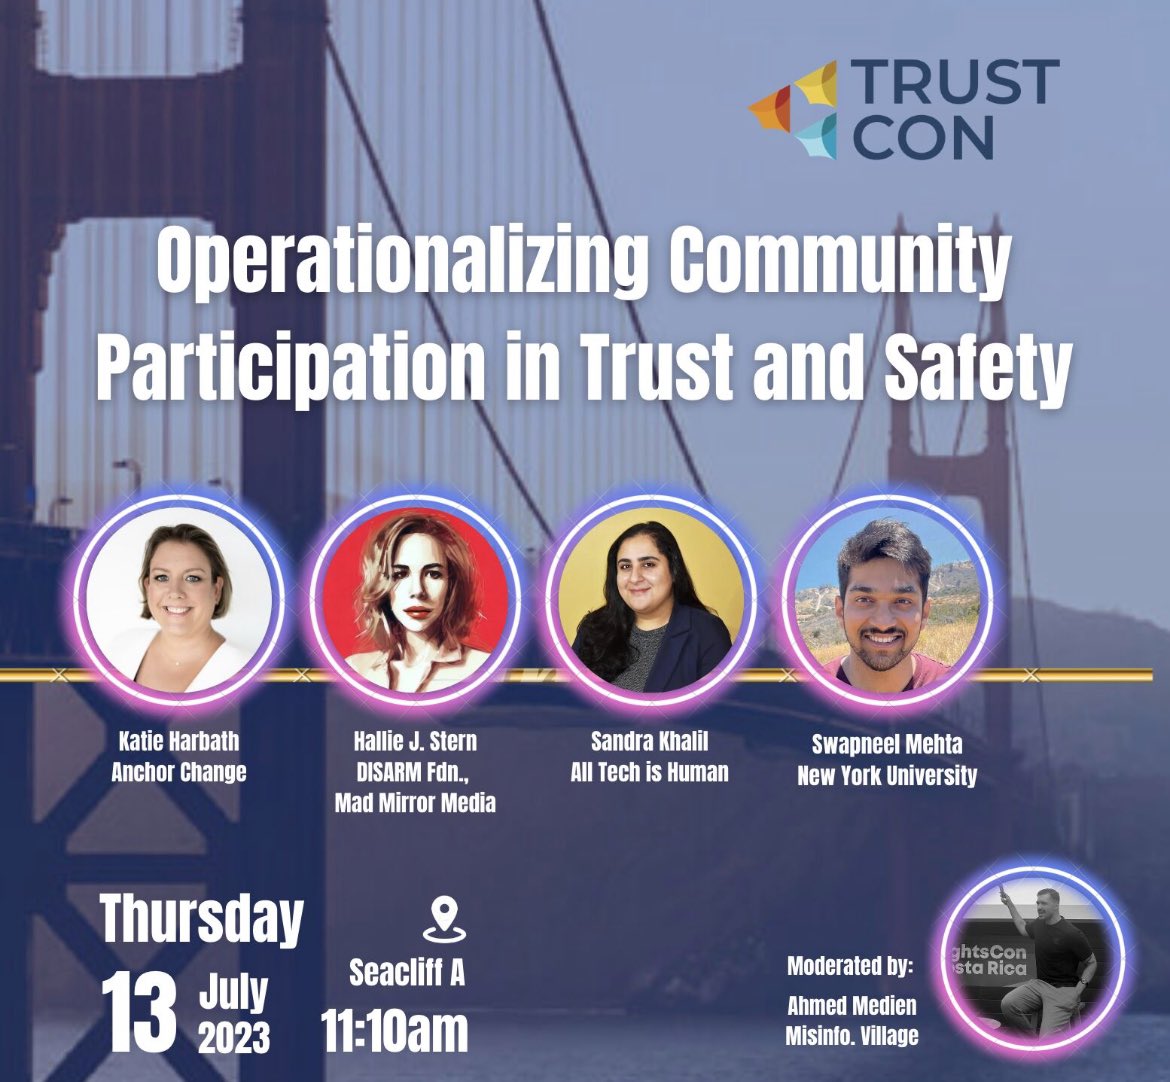 I'm stoked to announce our panel on 'Operationalizing Community participation in Trust and Safety' at #trustcon23 in San Francisco discussing learnings and experiences building academic, professional, and cross-cutting communities to advance #integrity and #trustandsafety